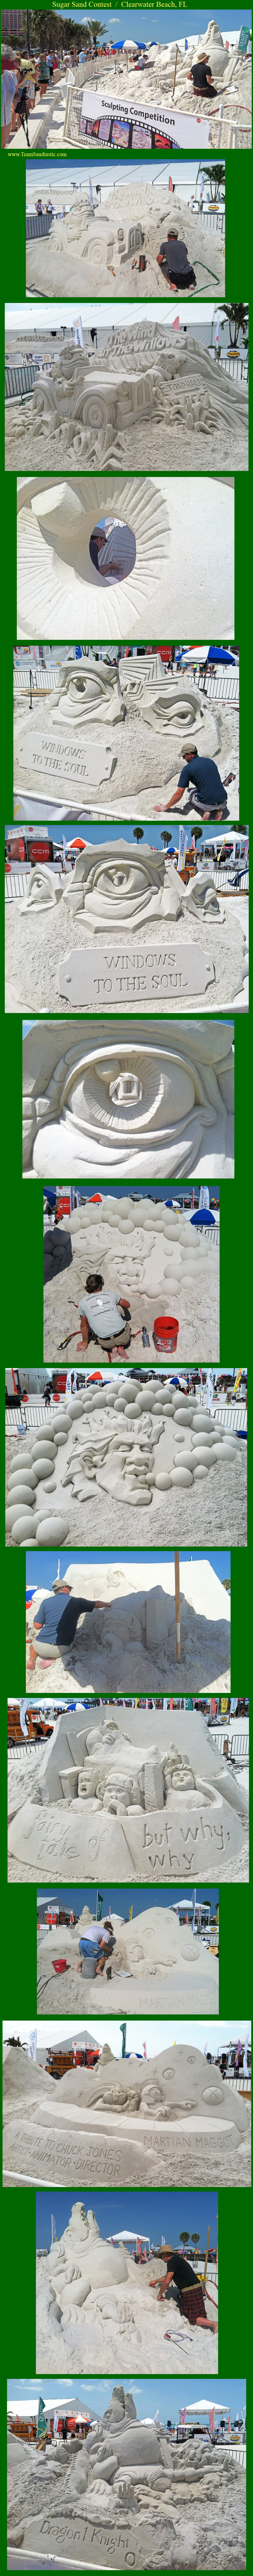 Clearwater Sand Sculpting Contest